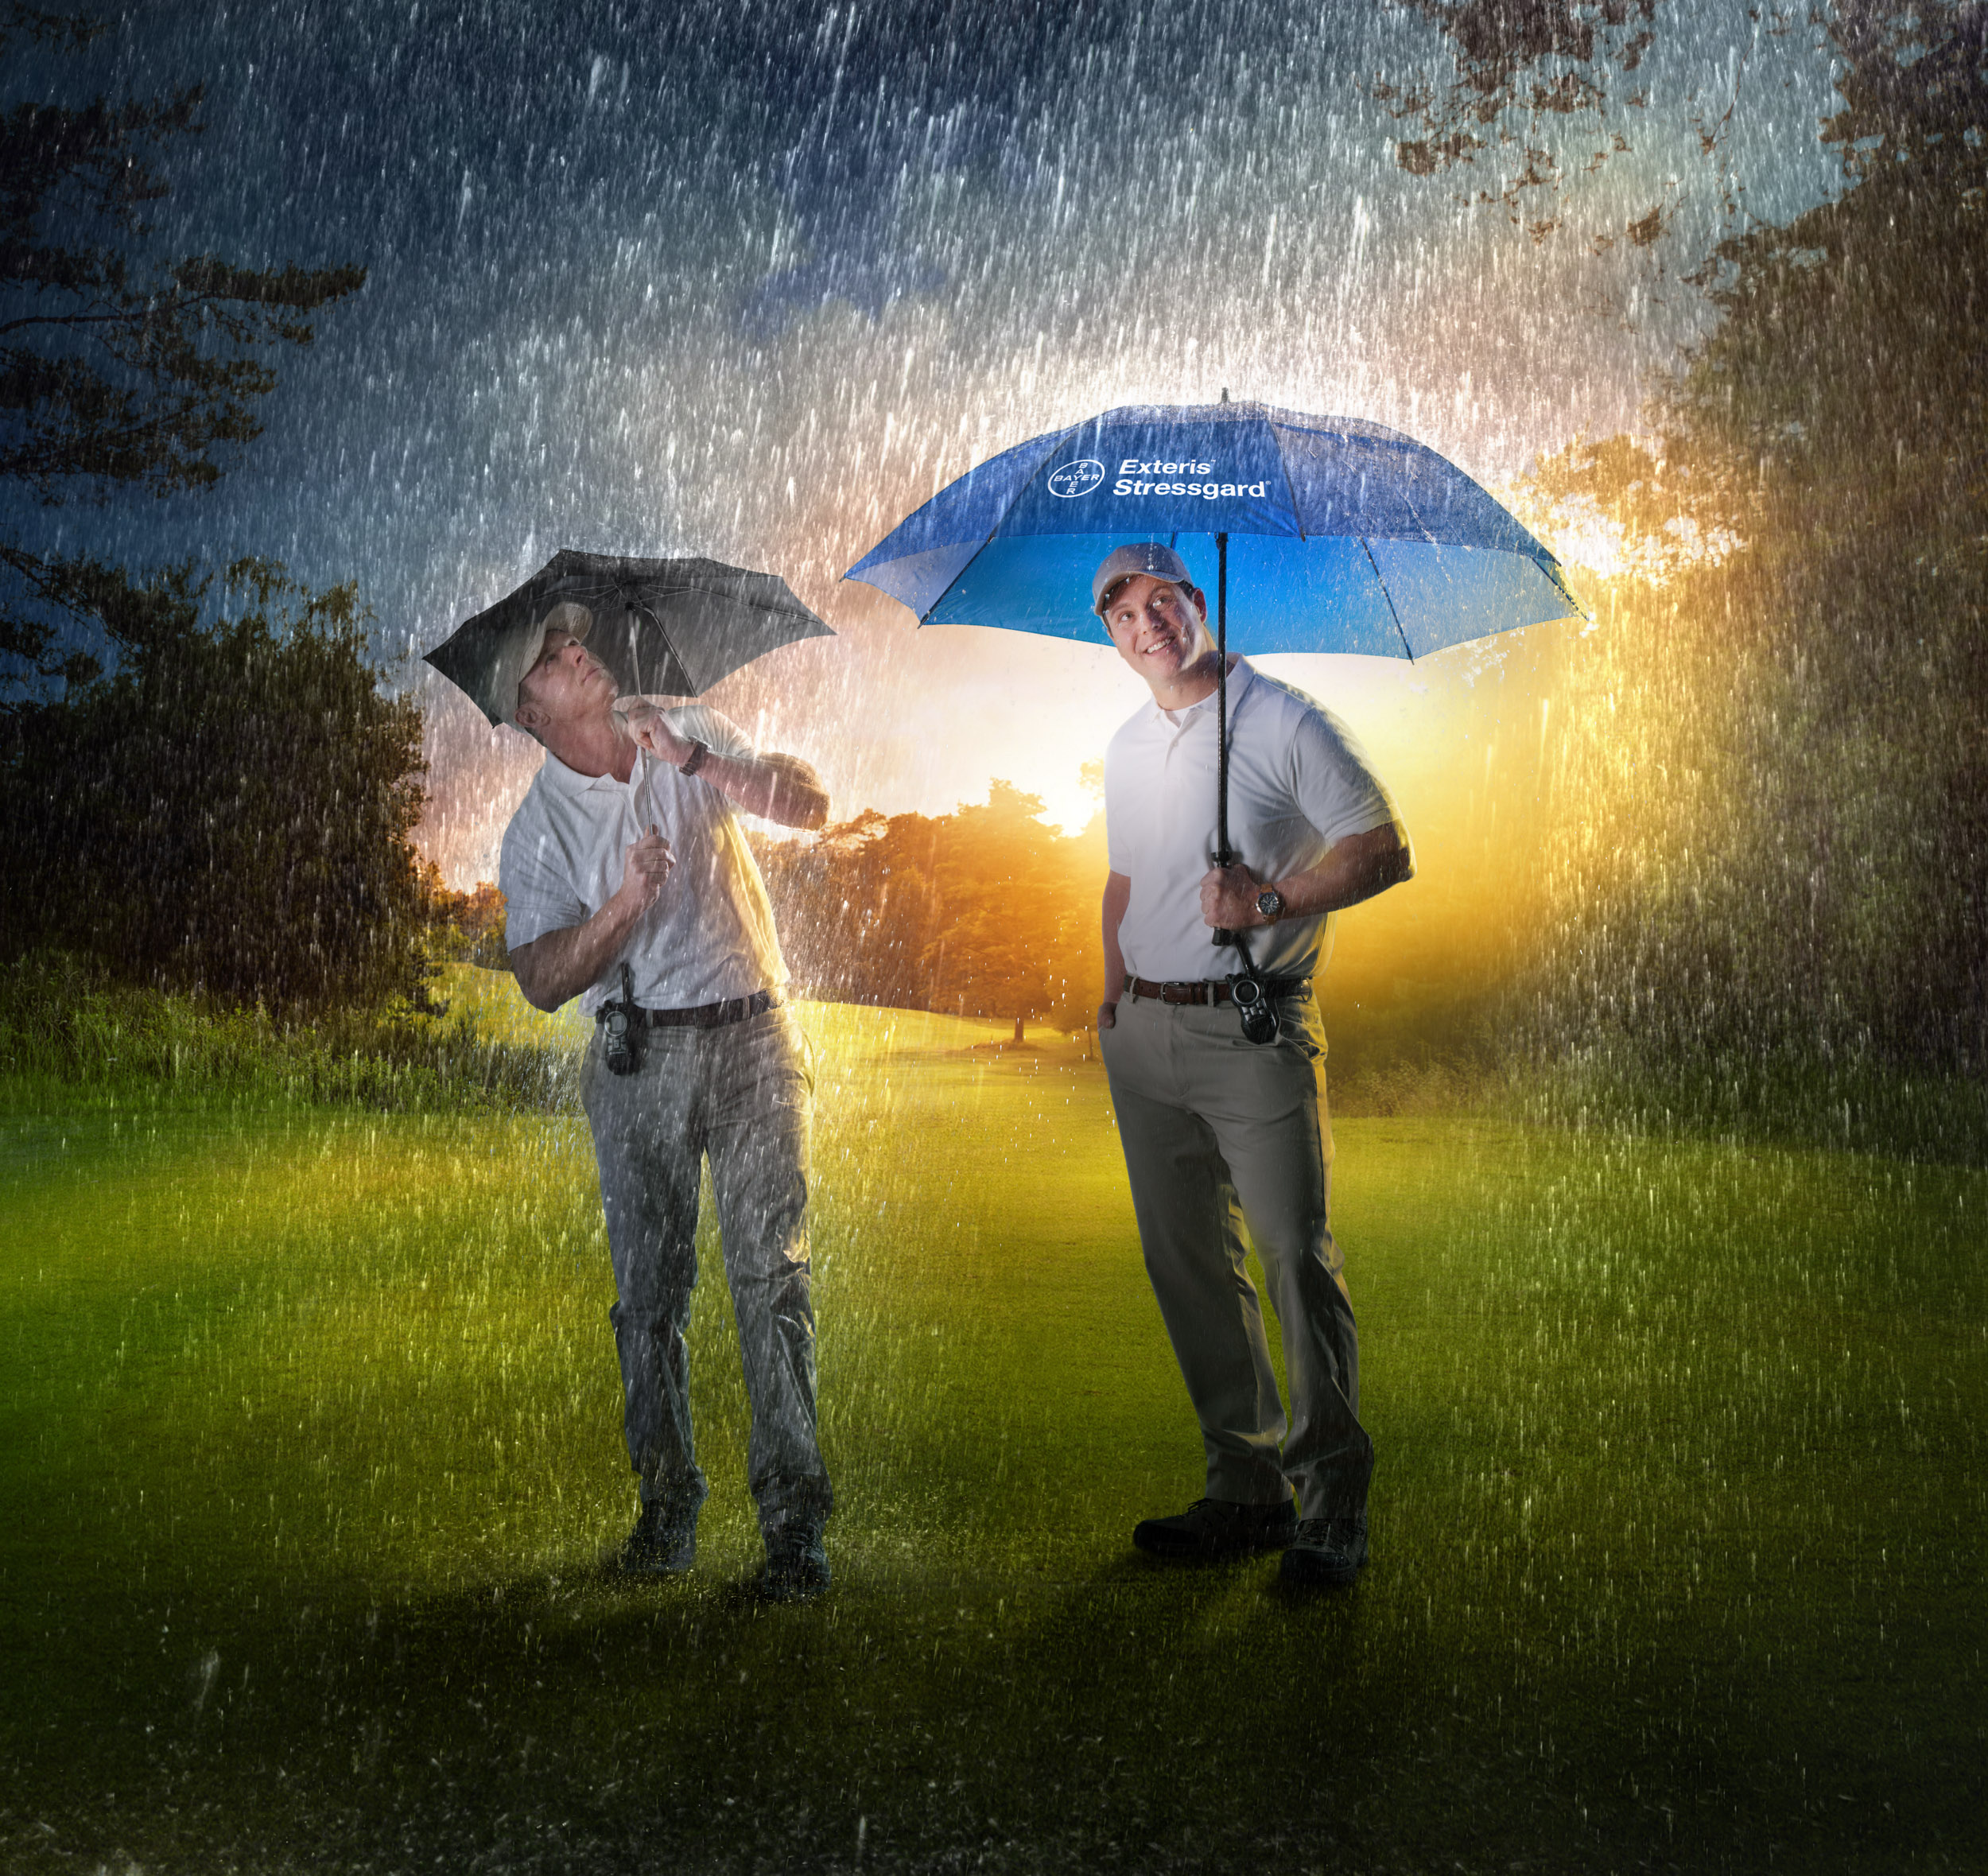 Two people in the rain with umbrellas 